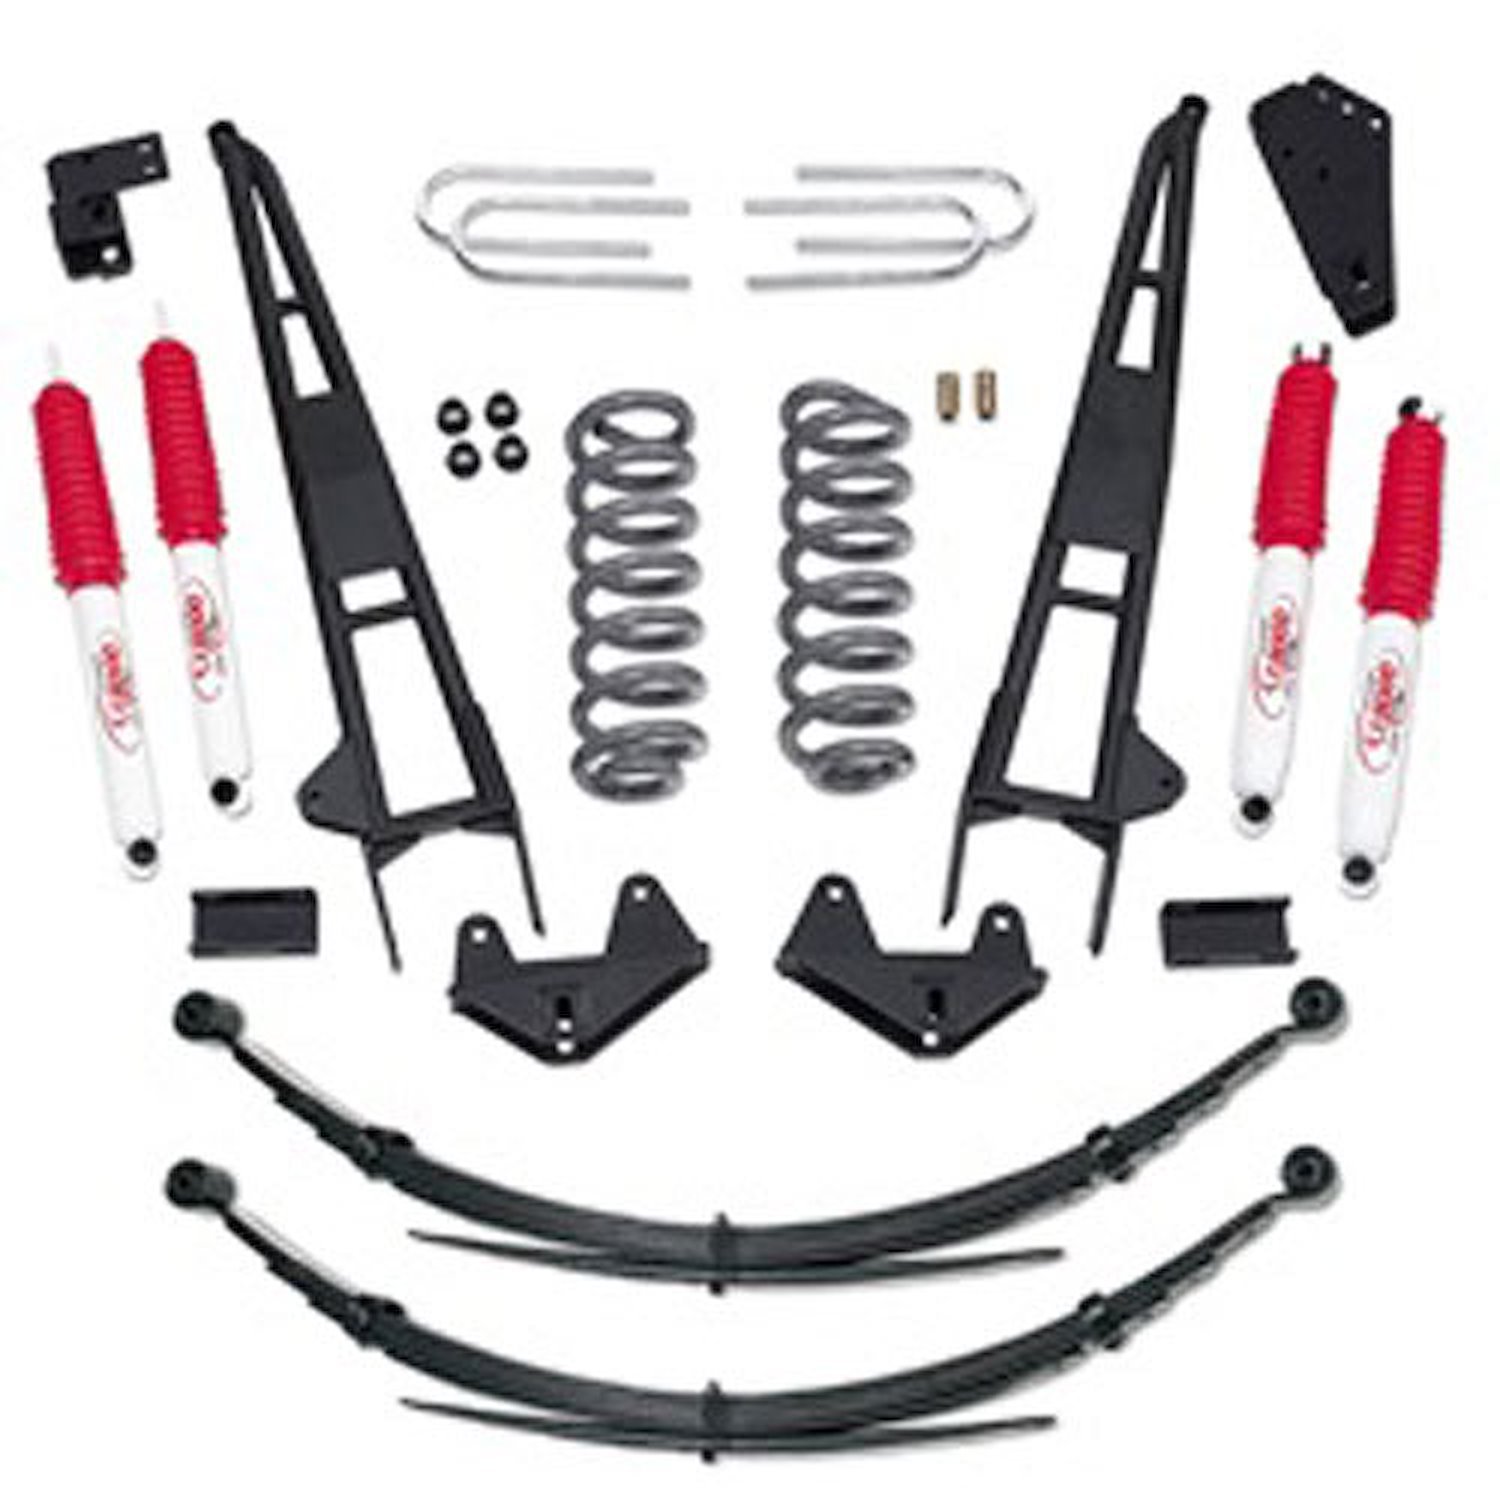 Suspension Lift Kit 1981-96 Ford F150 & Bronco 4wd